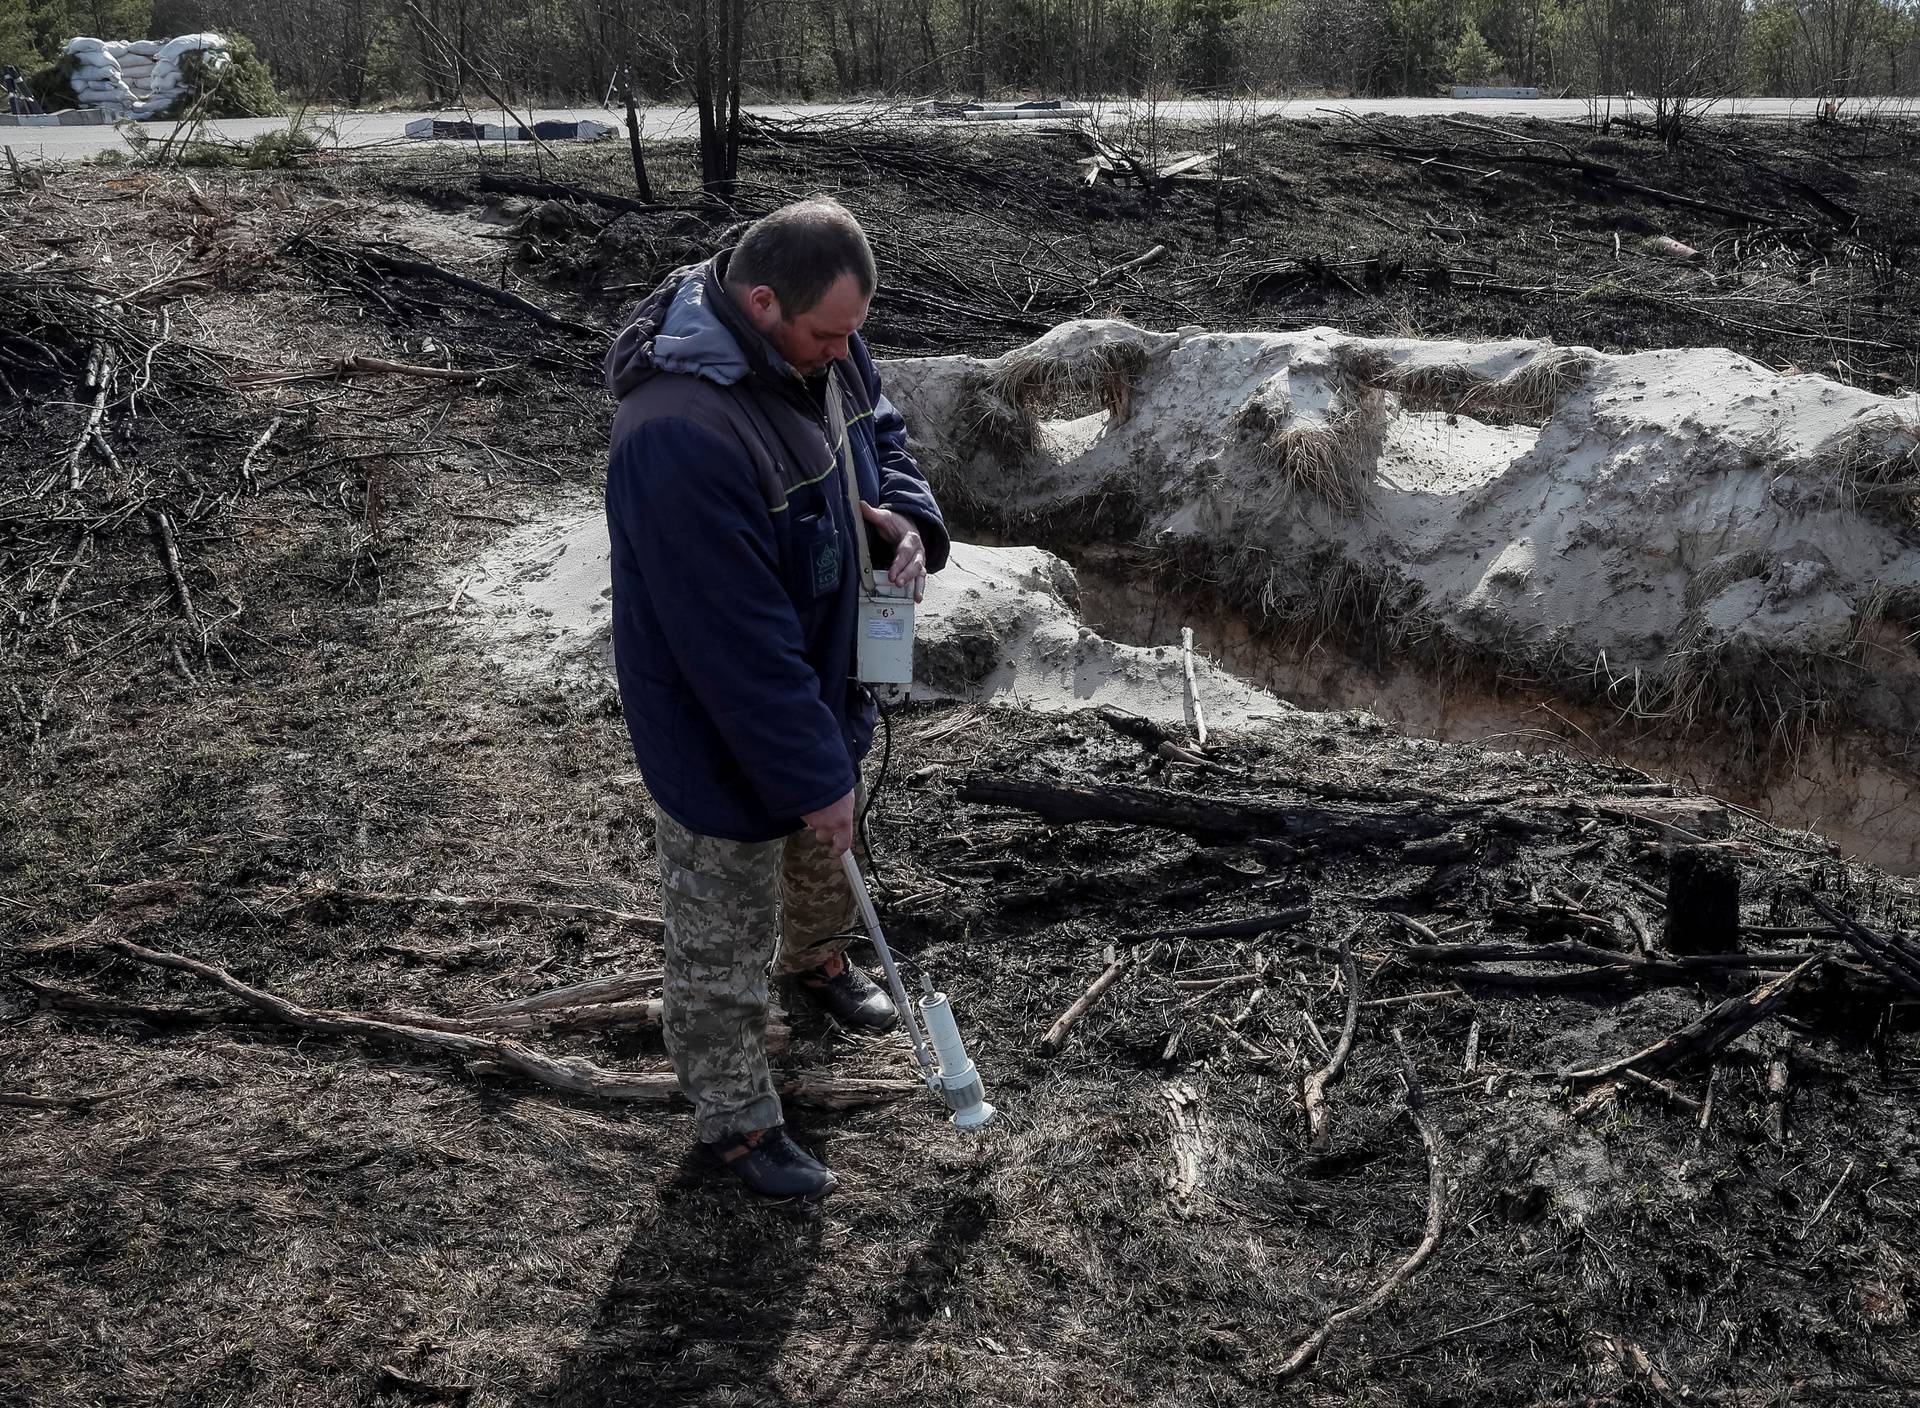 A dosimetrist measures the level of radiation around trenches dug by the Russian military in an area with high levels of radiation called the Red Forest near the Chernobyl Nuclear Power Plant, in Chernobyl